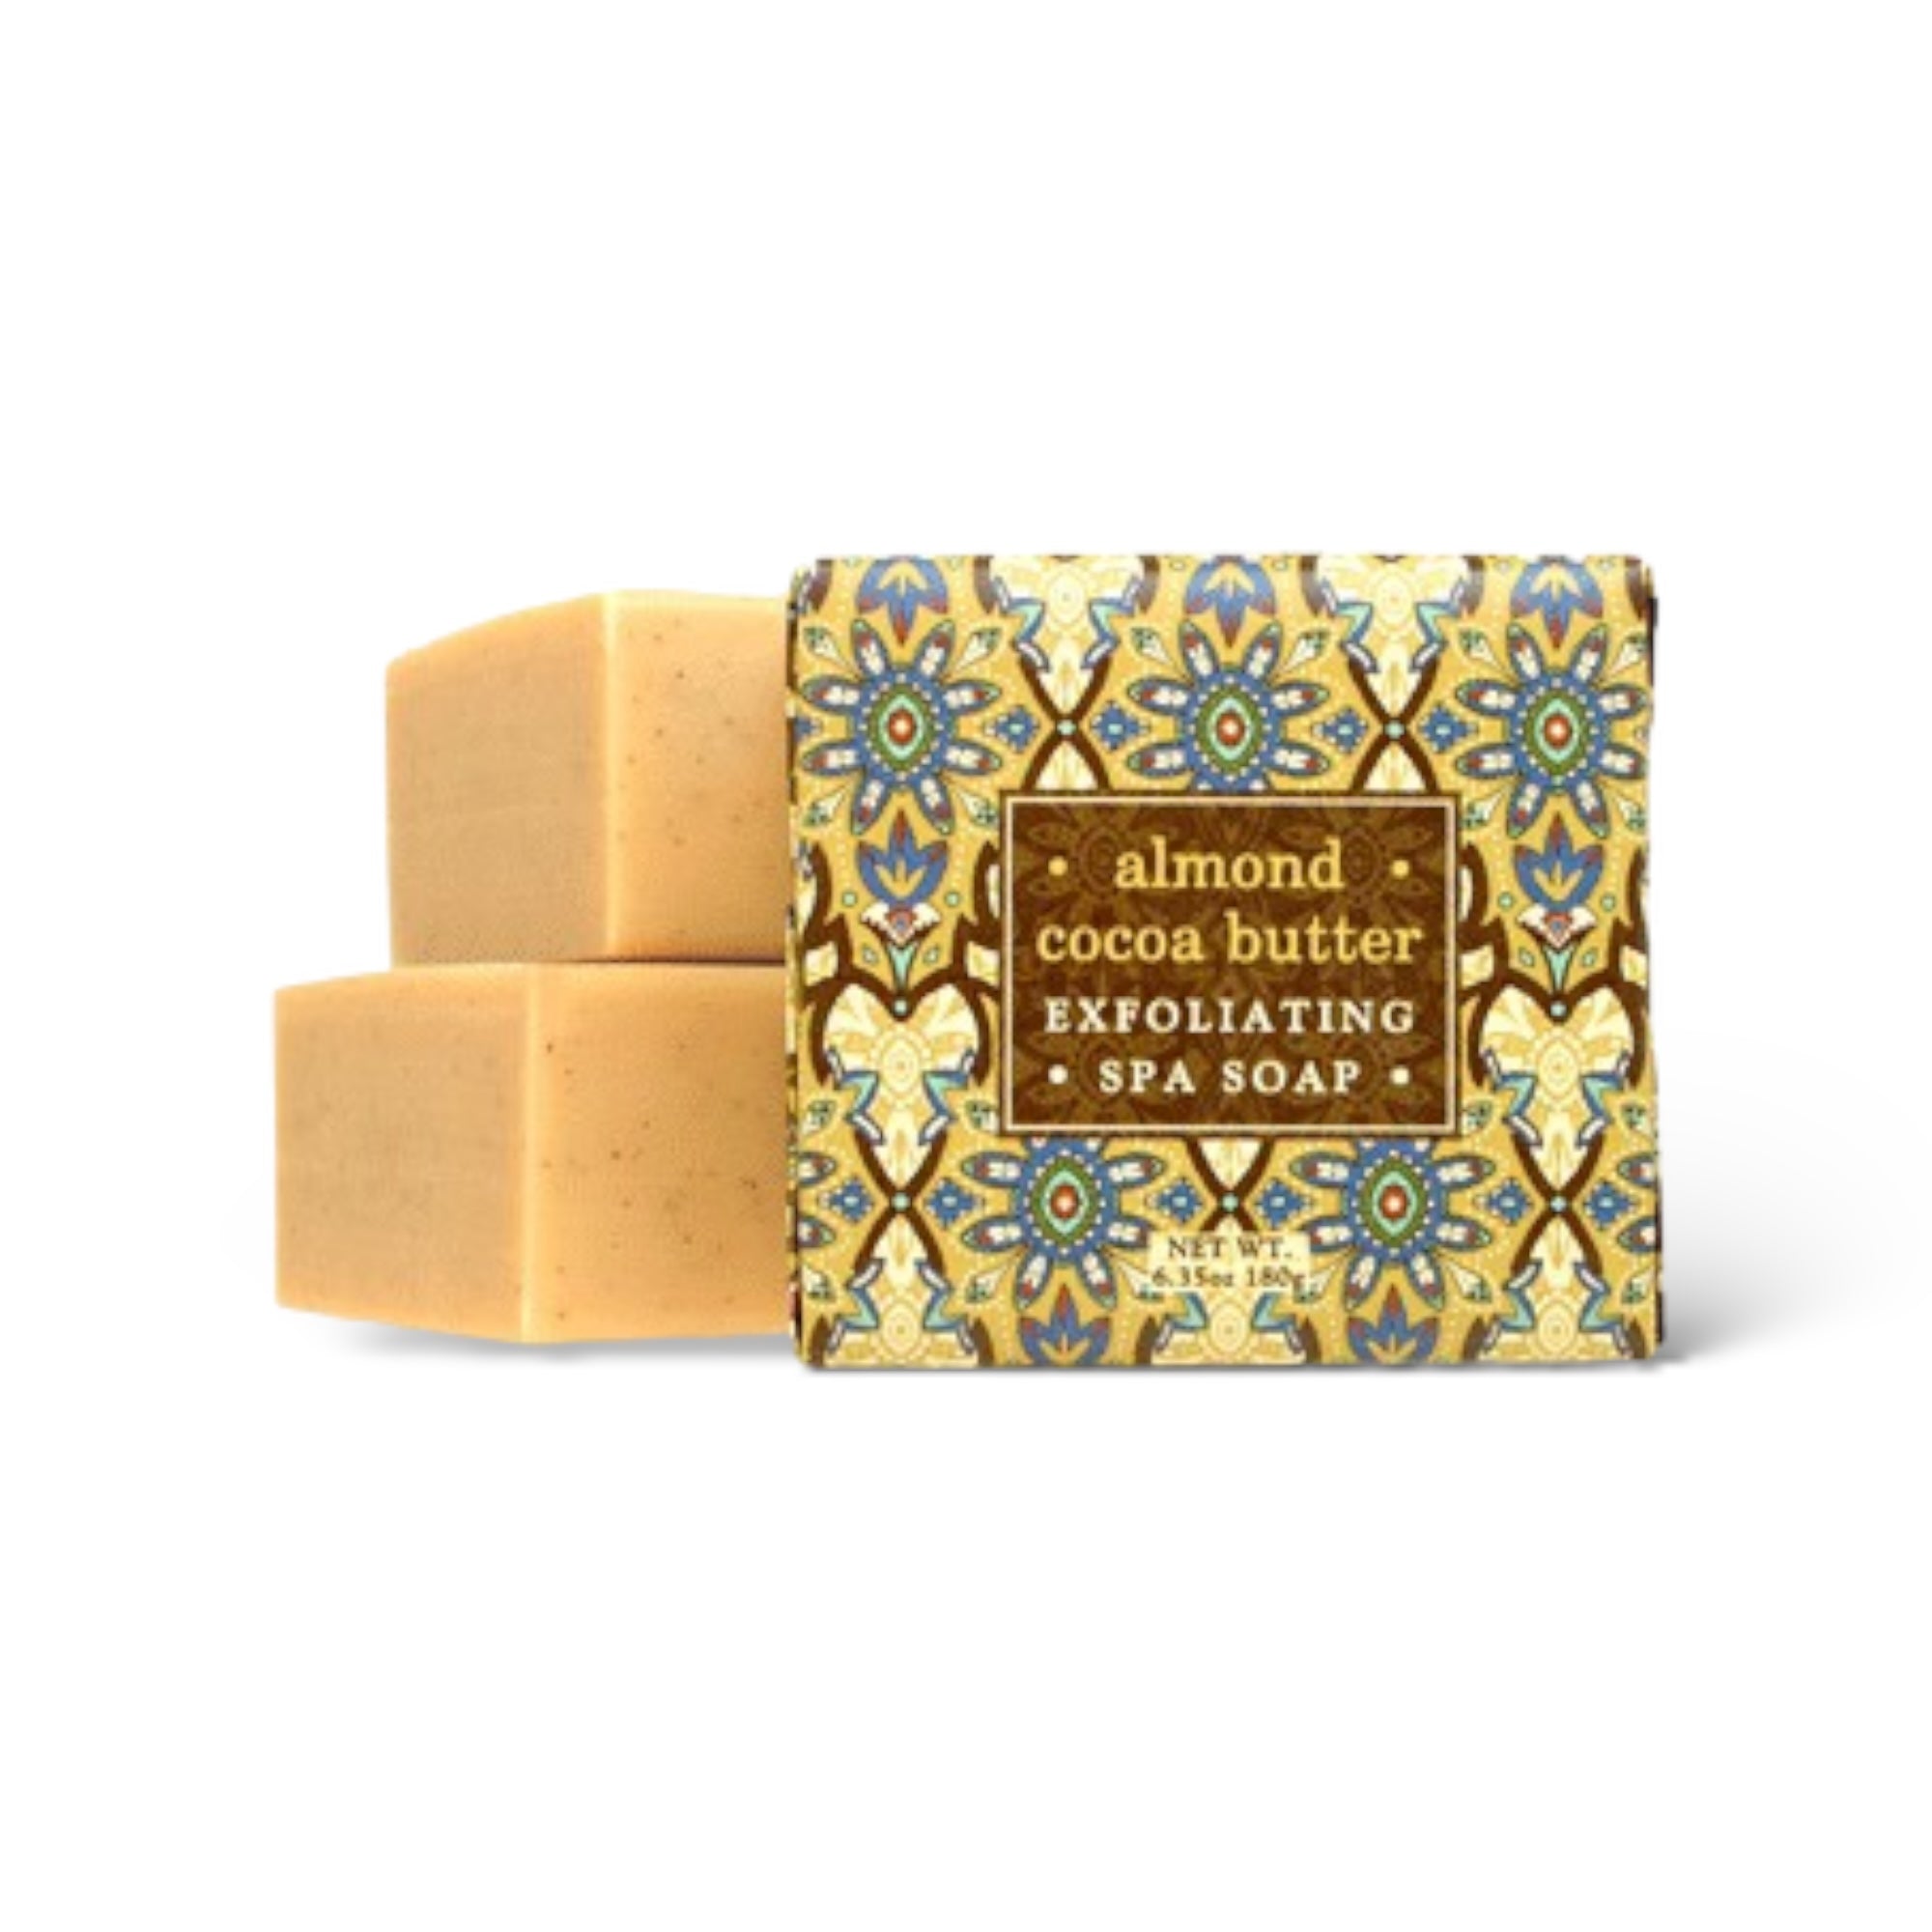 Almond & Cocoa Butter Exfoliating Spa Soap by Greenwich Bay Trading Co.